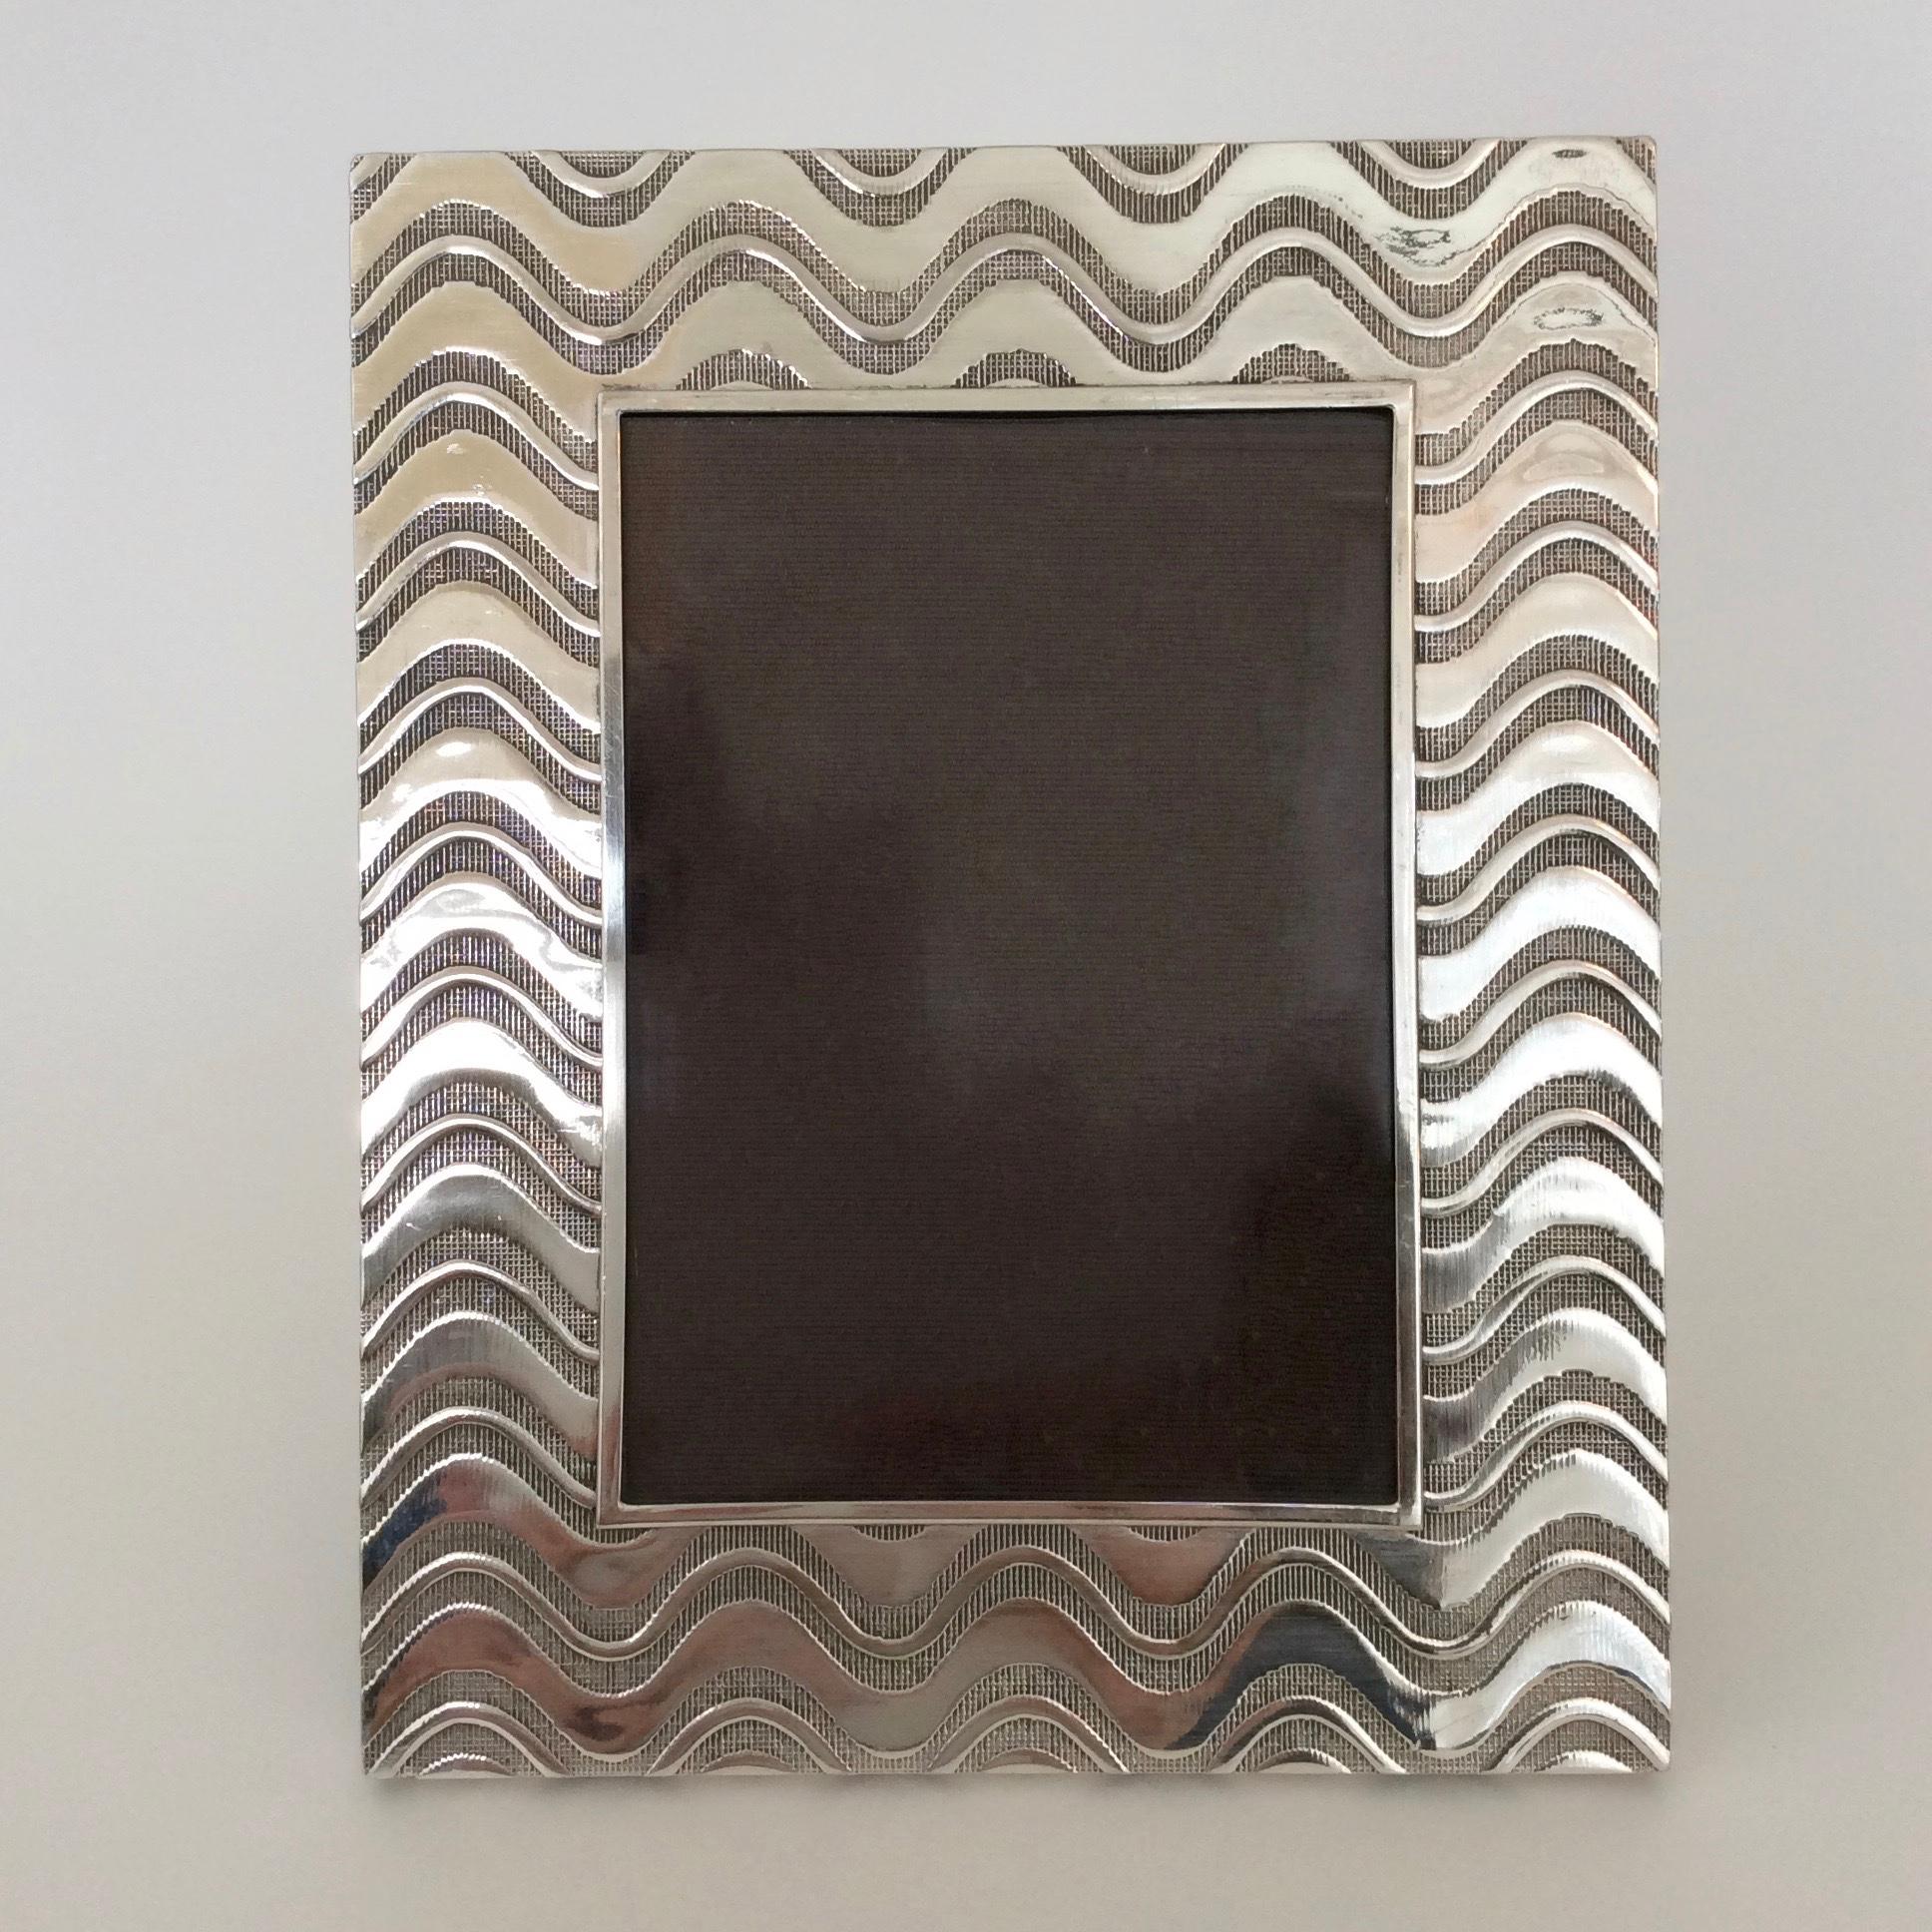 Nice Christian Dior picture frame, circa 1970, France.
Silvered metal, glass.
Dimensions: 20 cm H, 16 cm W, 2 cm D.
Good condition.
We ship worldwide
 






Style GUCCI, DIOR, Louis Vuitton,...